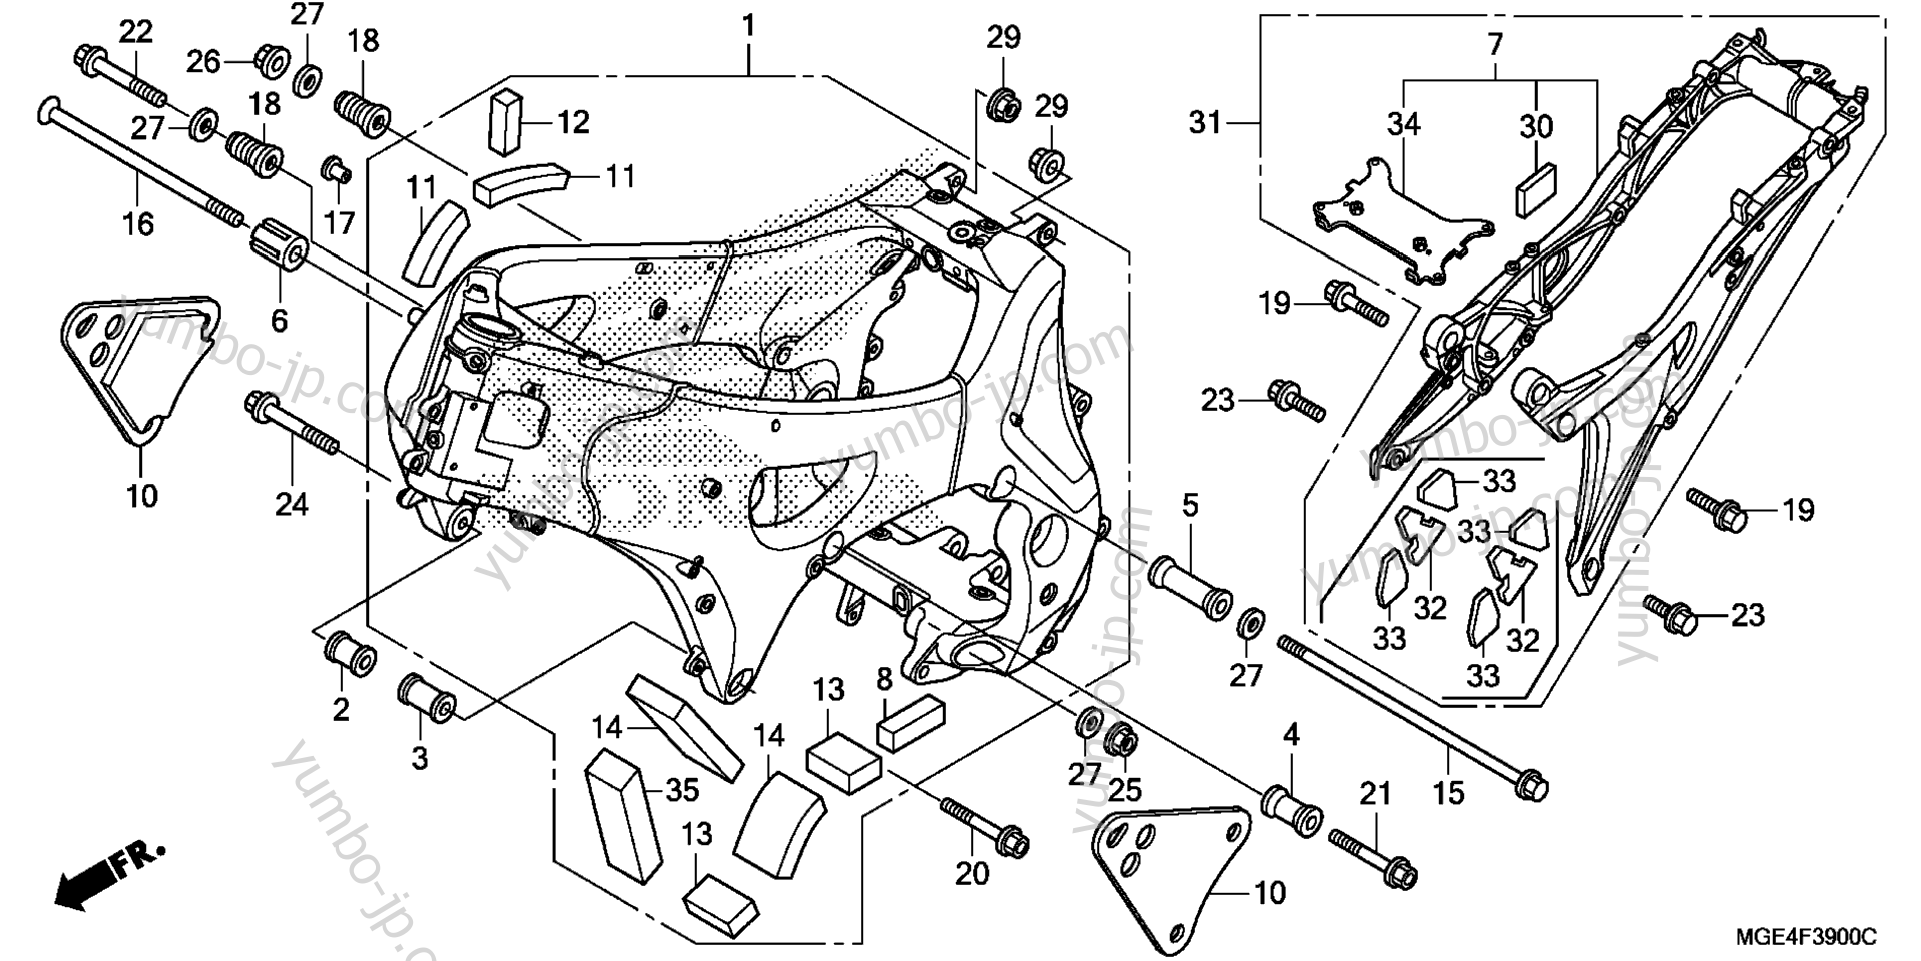 FRAME for motorcycles HONDA VFR1200F AC 2012 year